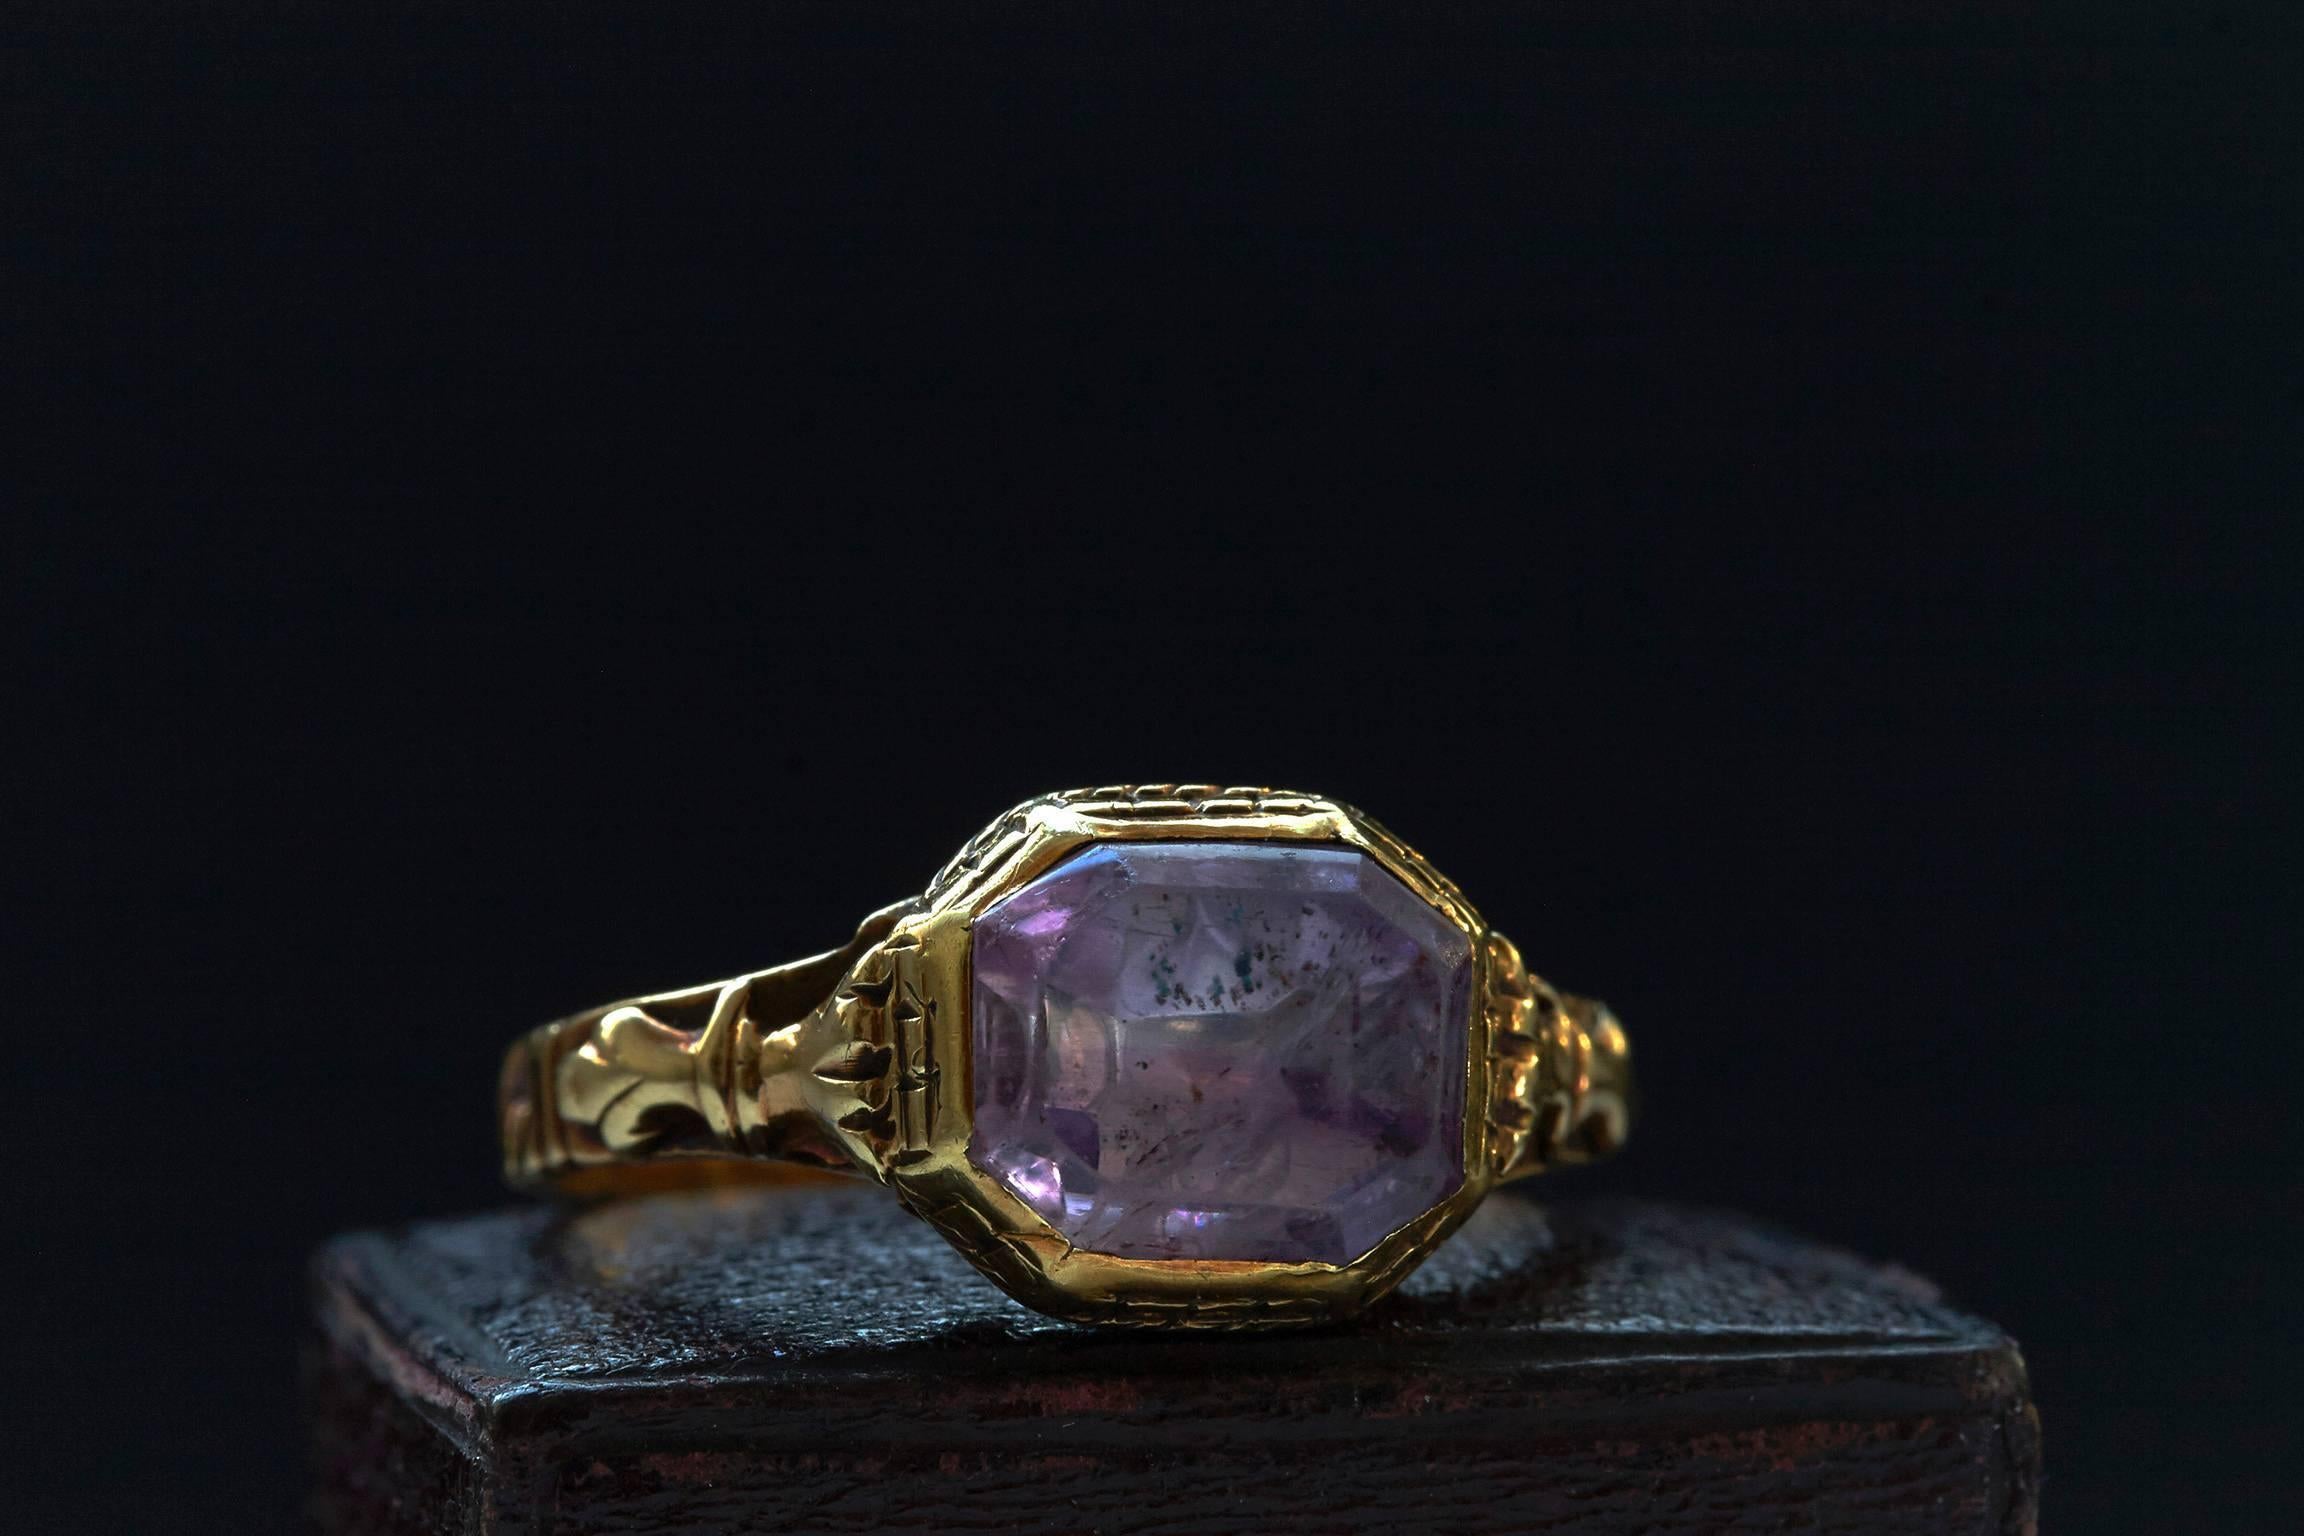 C.1750. A Georgian foiled-back amethyst ring set in 15k yellow gold. The back has a desirable reeded setting, and the shank has uniquely adorned details. Beautiful example of Georgian period ring.

US Size: 7 (resizable)

*The ring on the ring